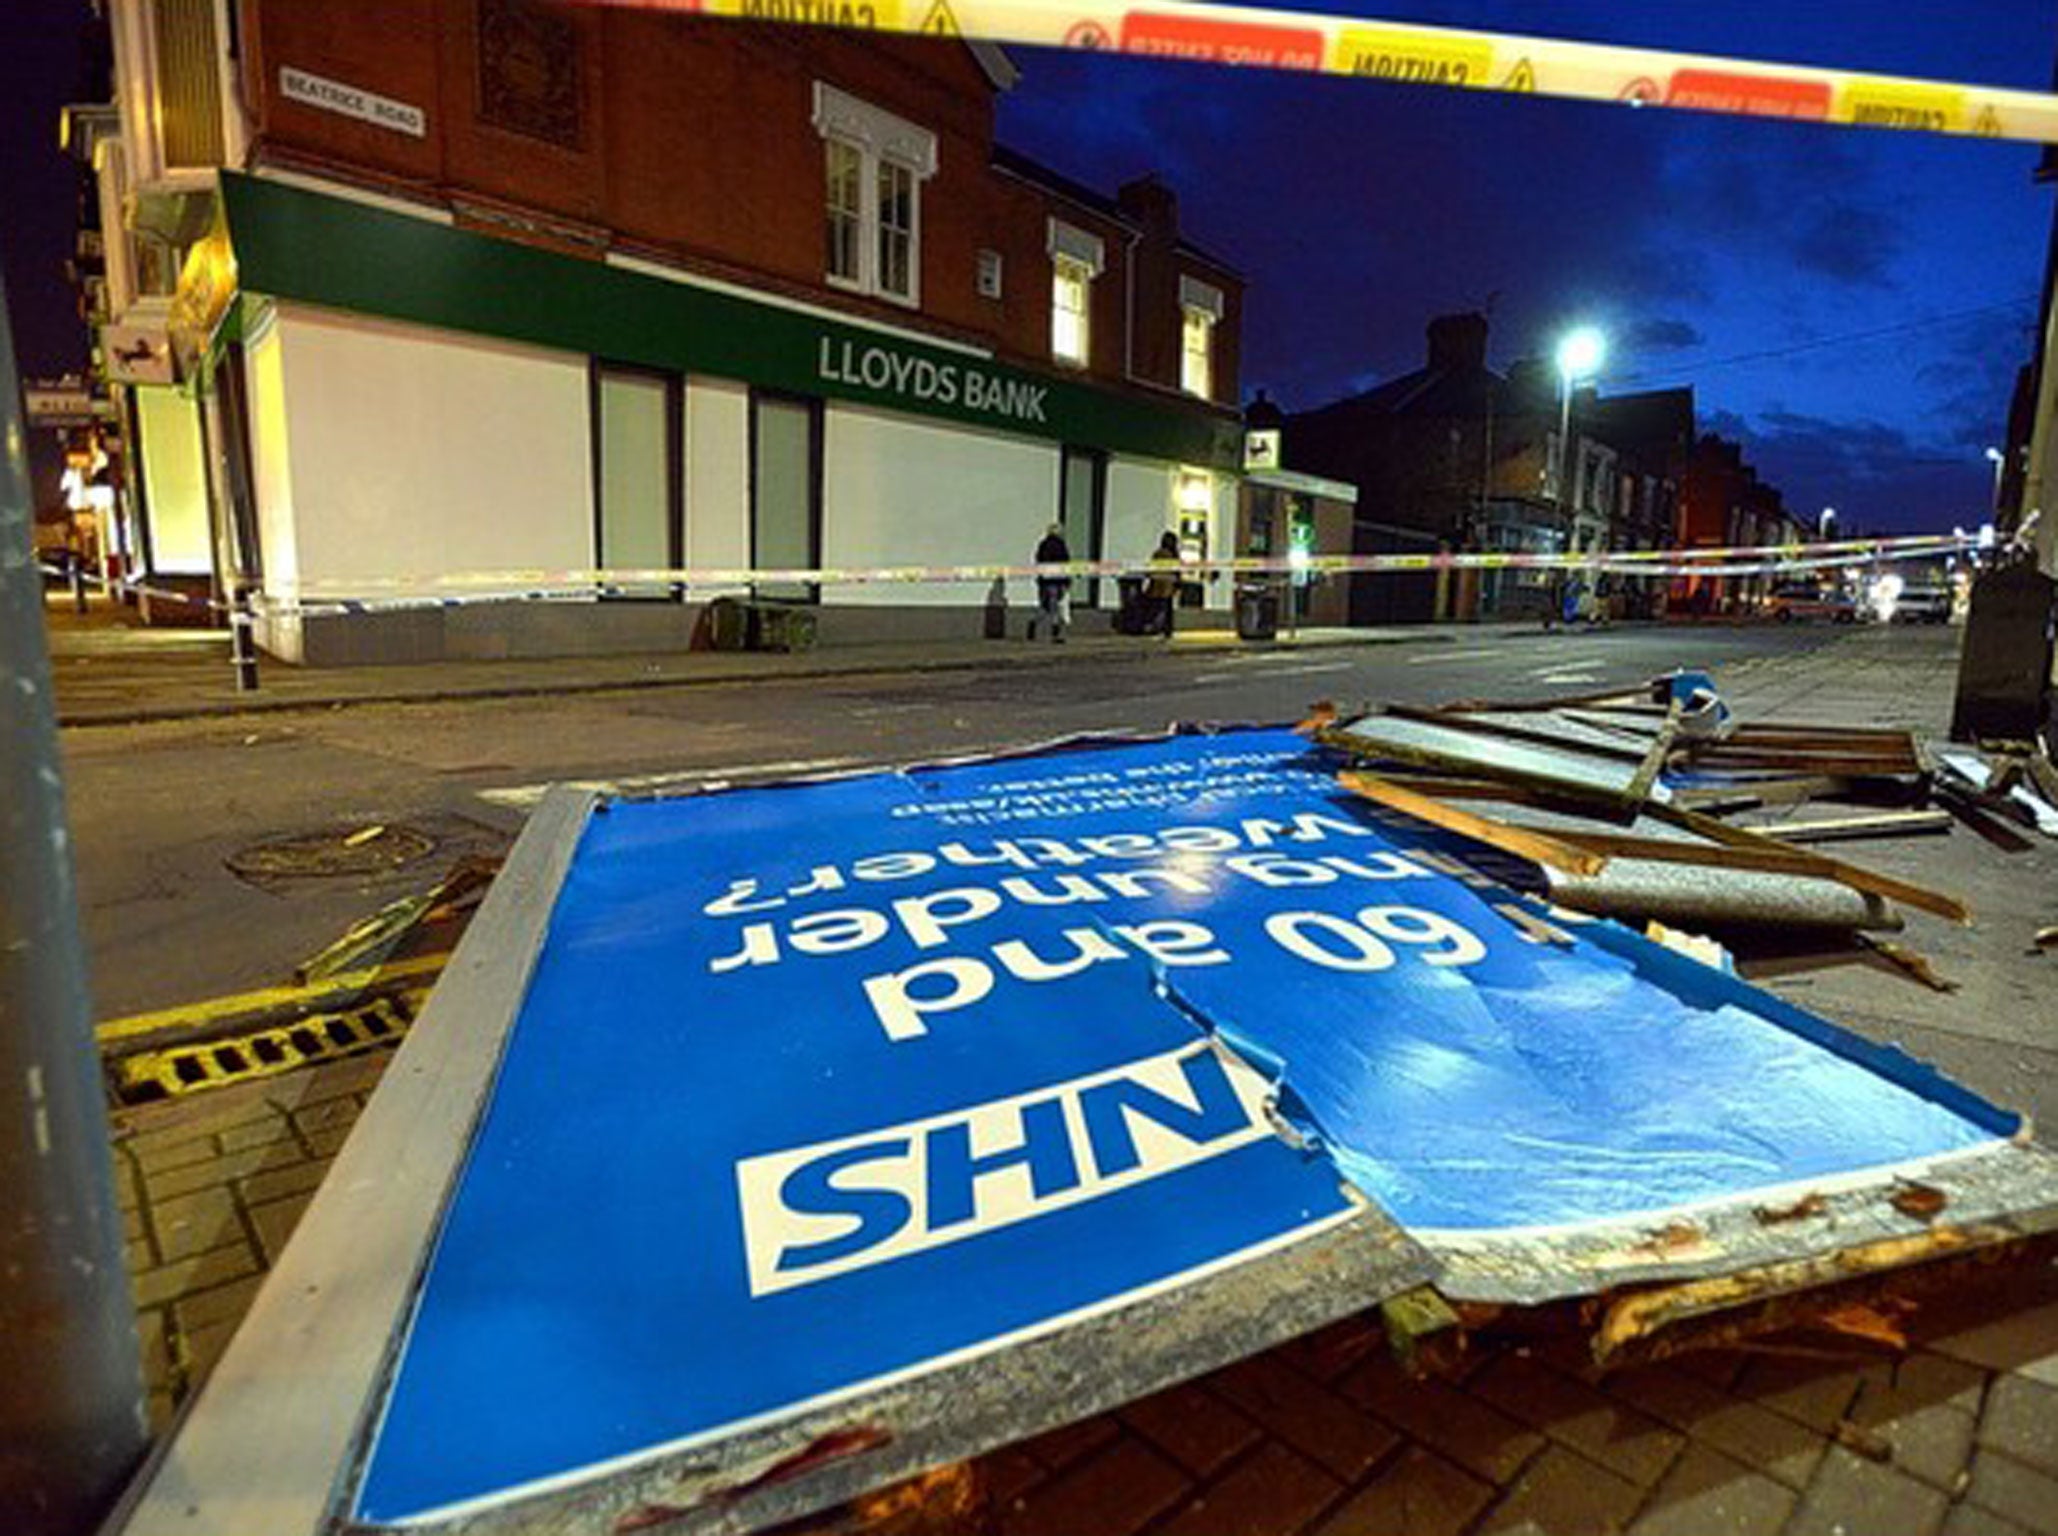 A "feeling under the weather sign" was blown off an advertising board by gale force winds, hitting a man on his head.